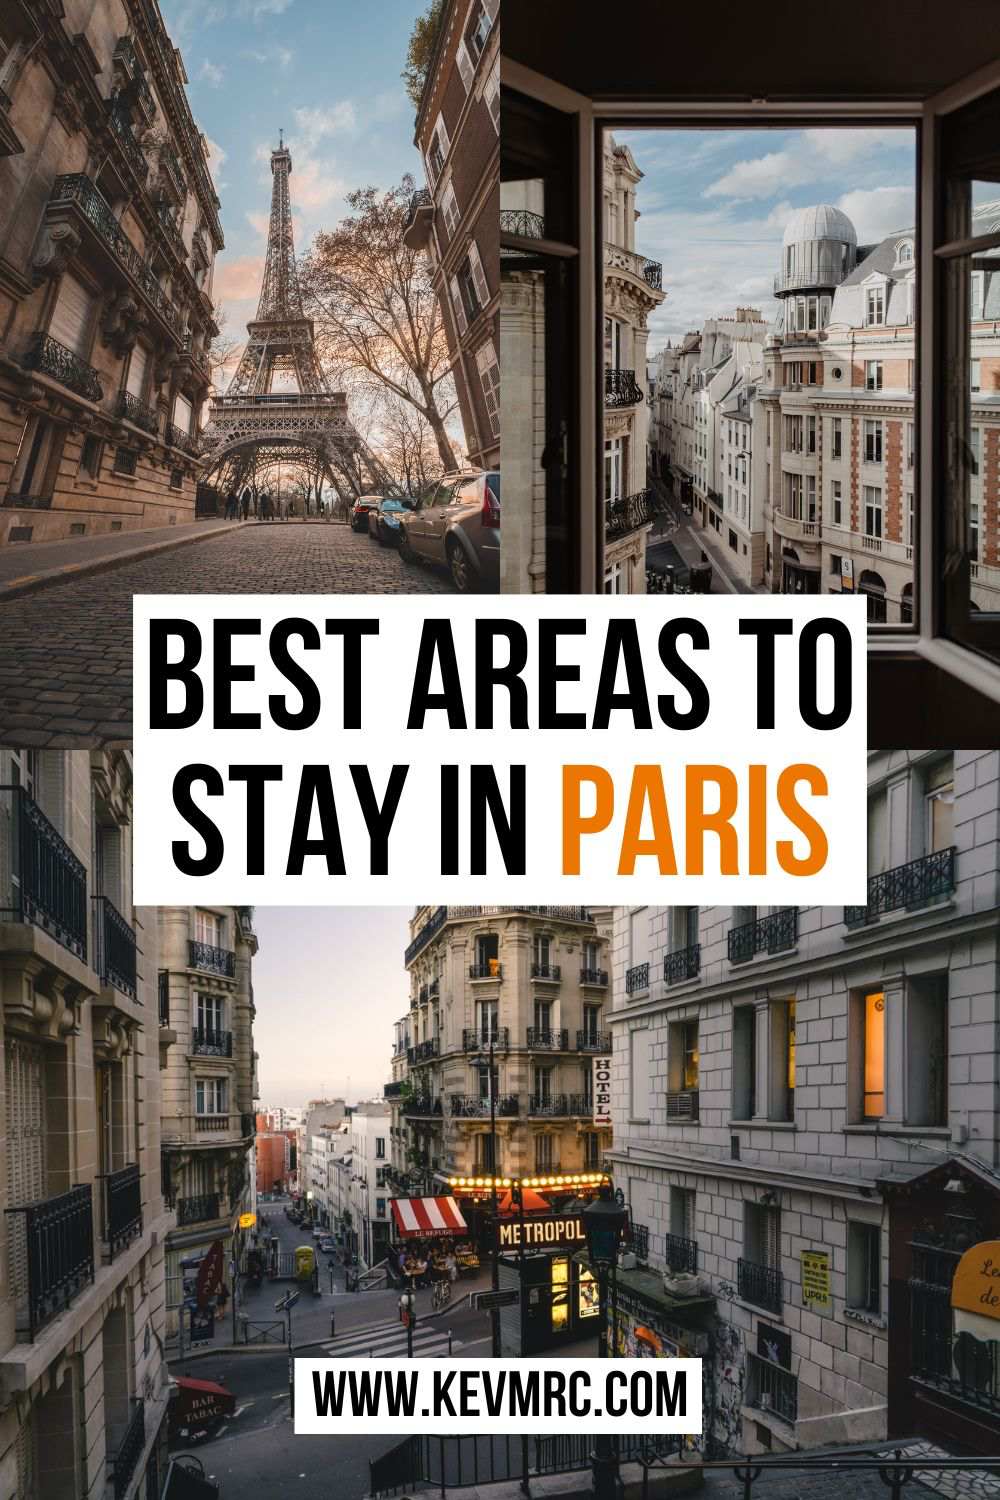 Wondering where to stay in Paris for the first time? Find your Paris home base through this guide, with details and pros & cons from a local. best areas to stay in paris | best area to stay in paris france | places to stay in paris france | best place to stay in paris | best neighborhoods to stay in paris | best hotels to stay in paris | best places to stay in paris hotels